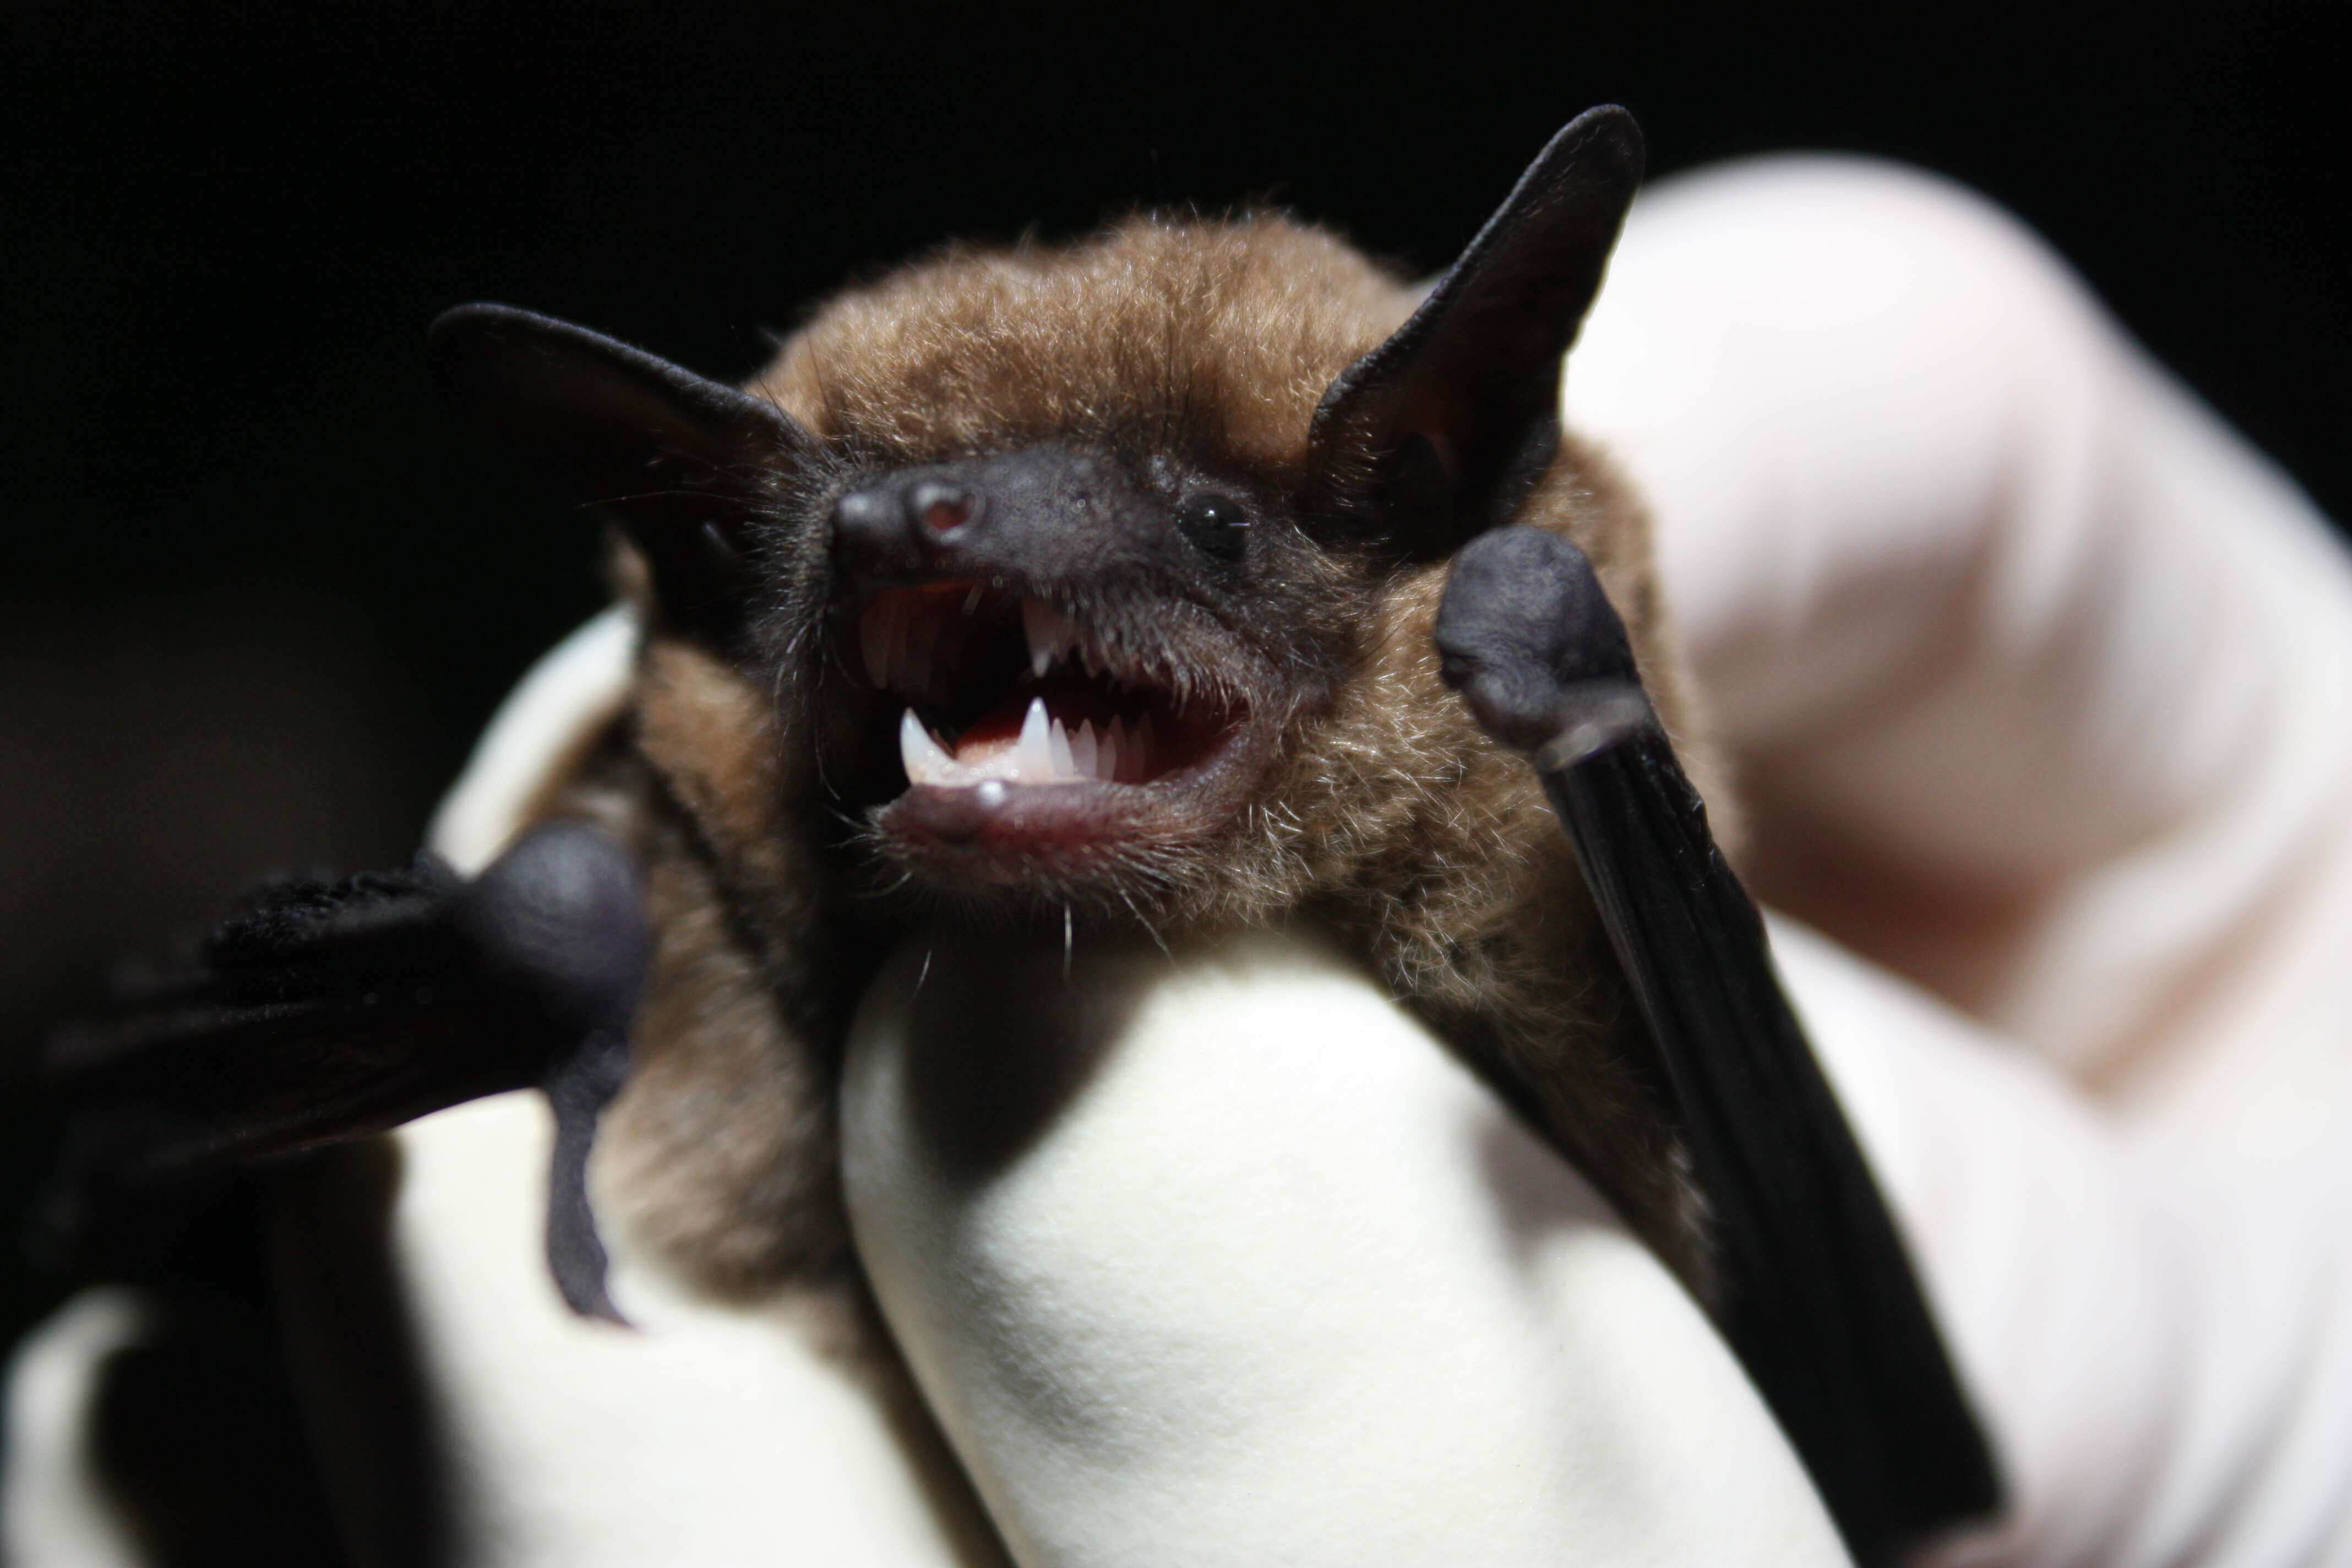 Image of Eastern Small-footed Myotis